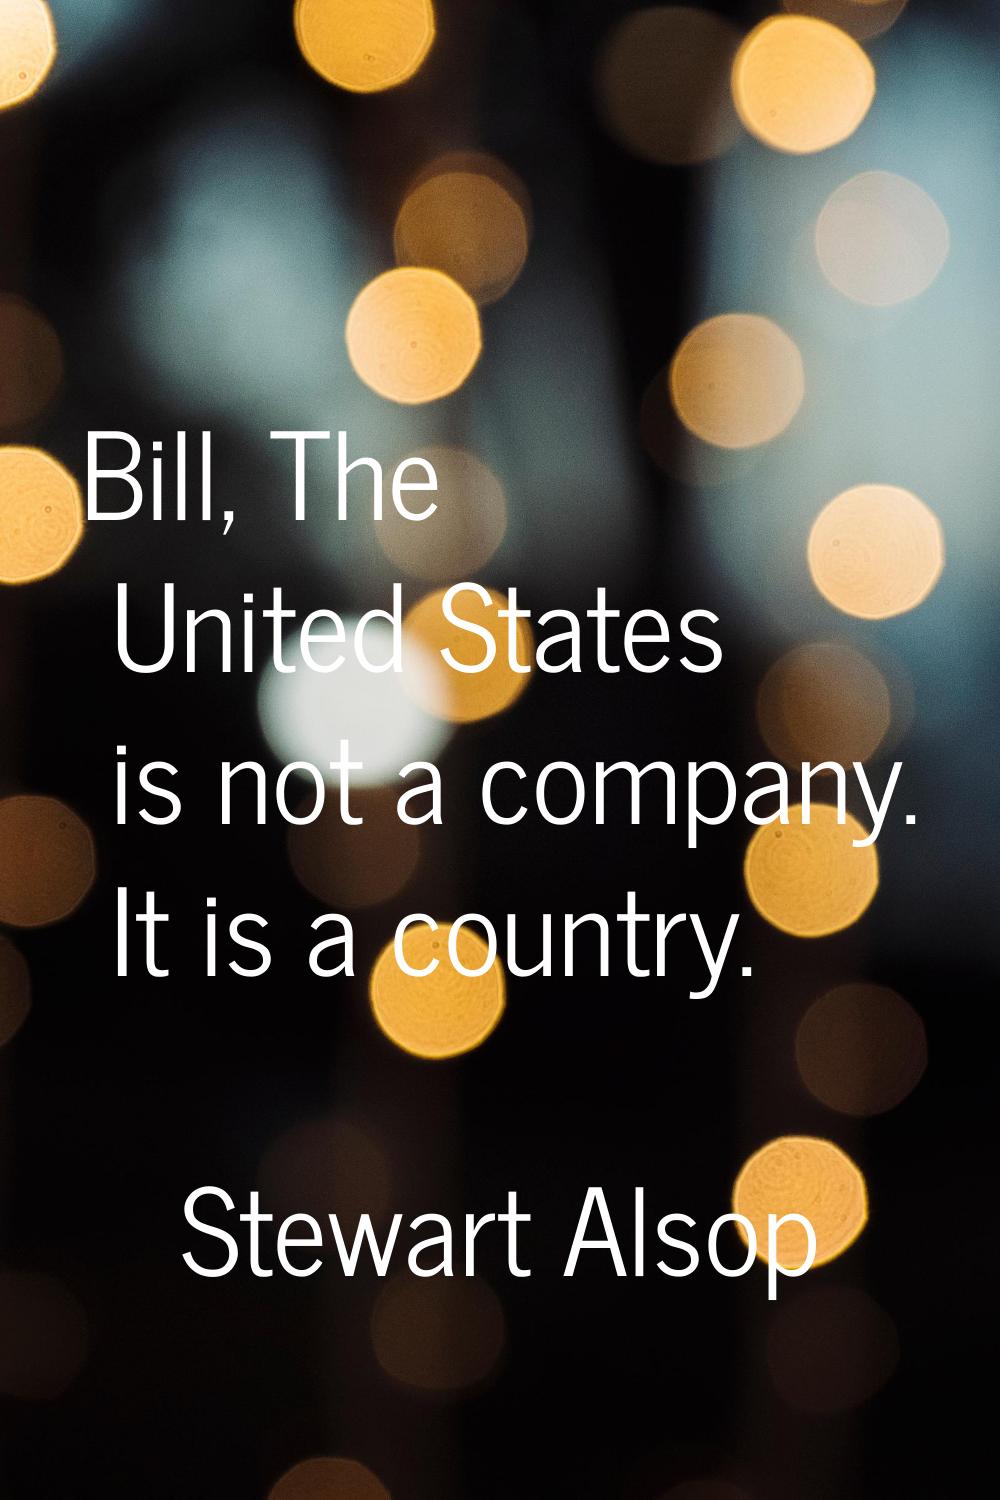 Bill, The United States is not a company. It is a country.